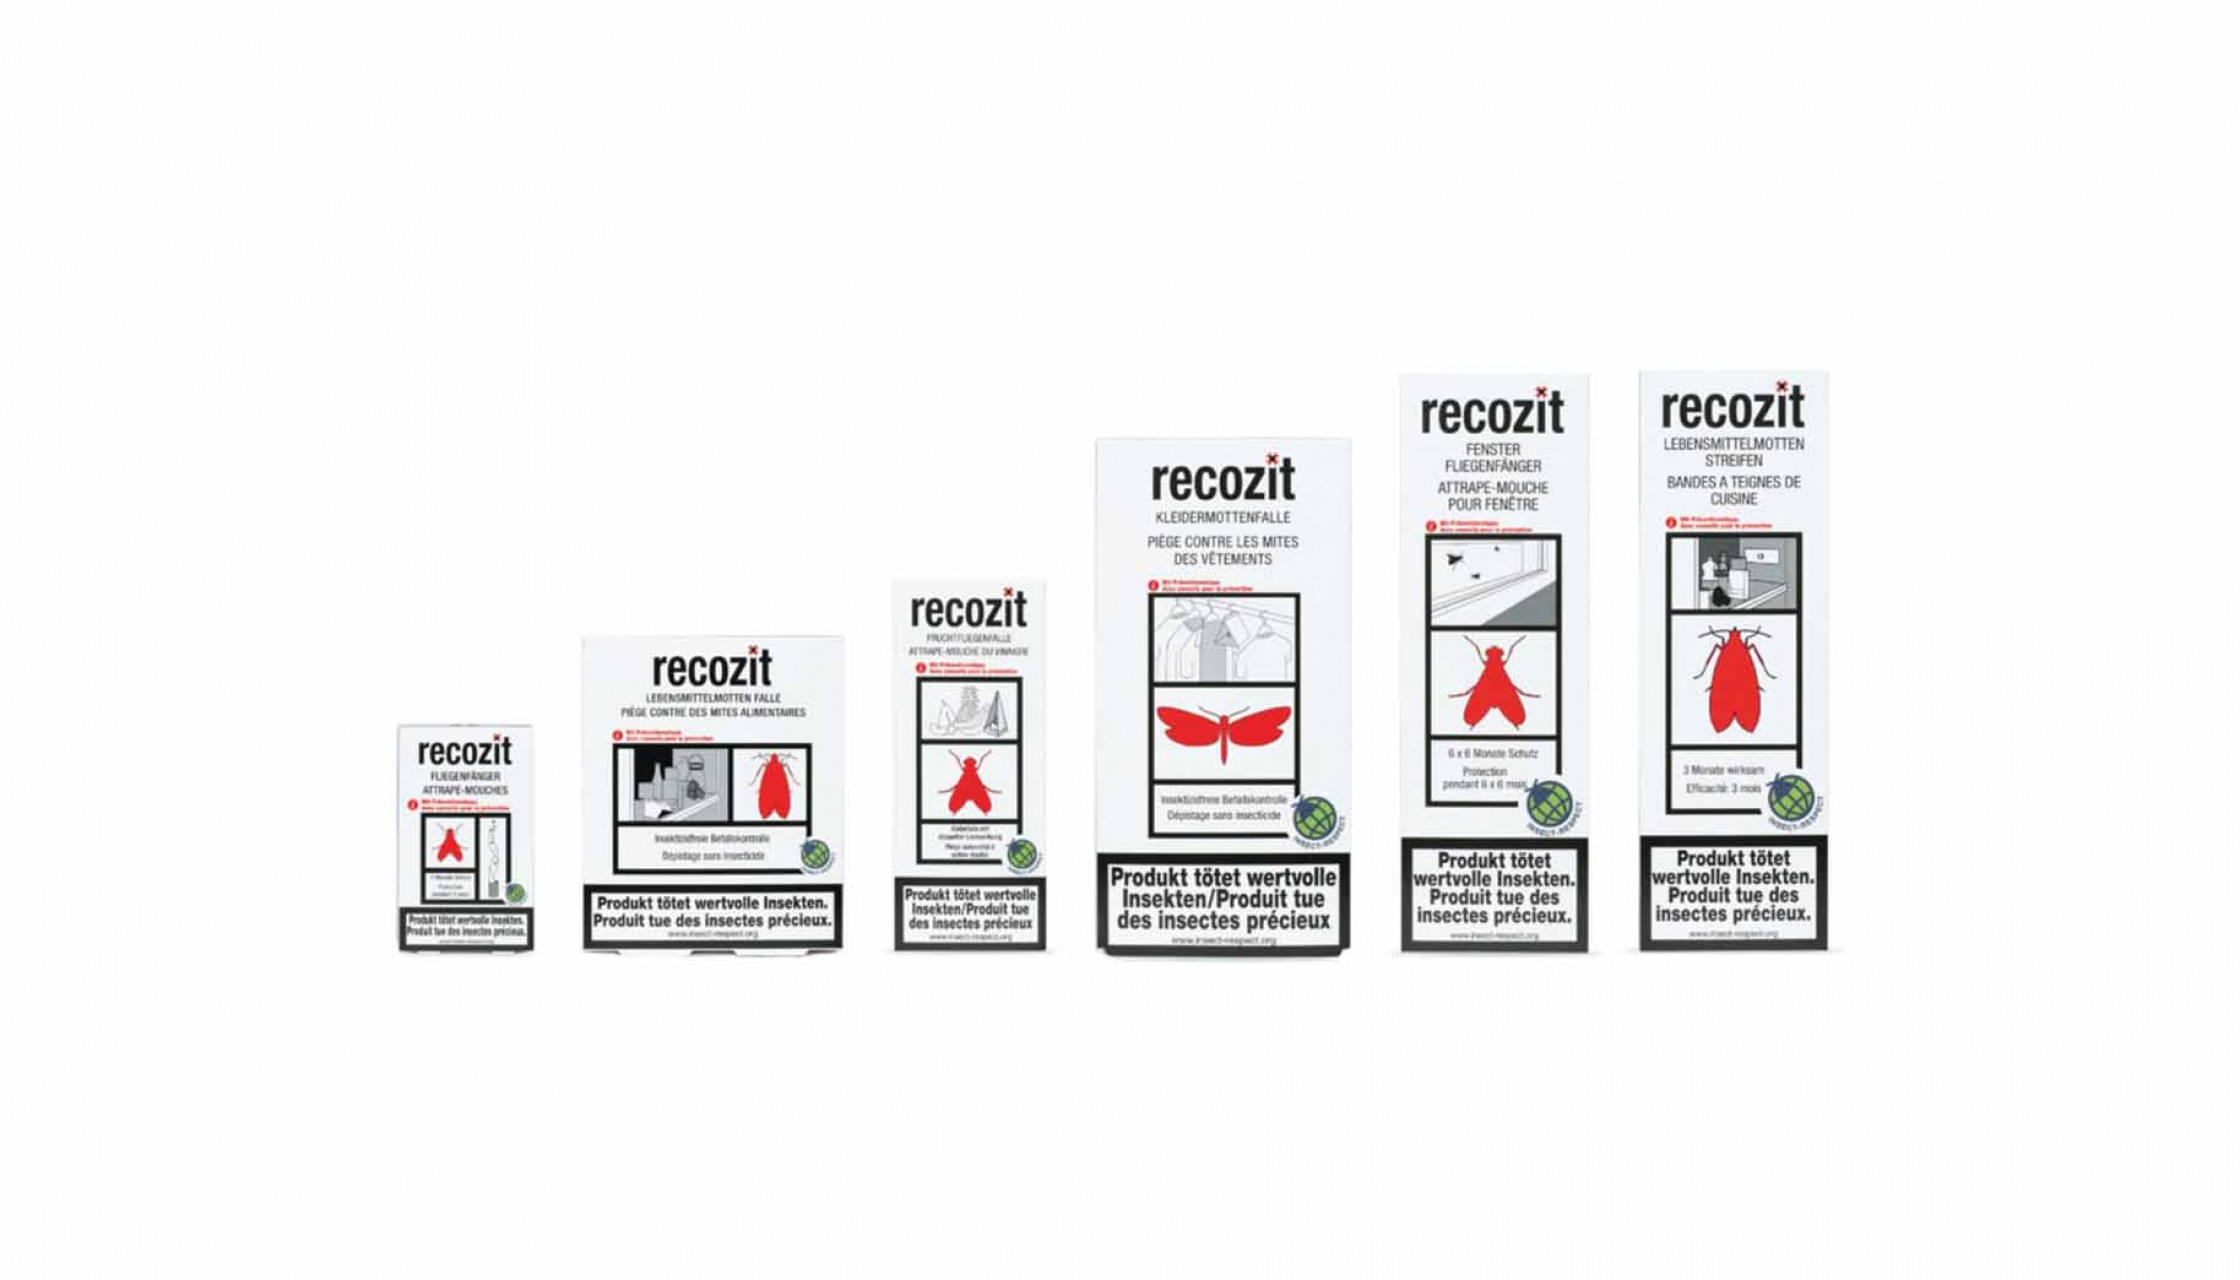 recozit – retail brand that makes a difference